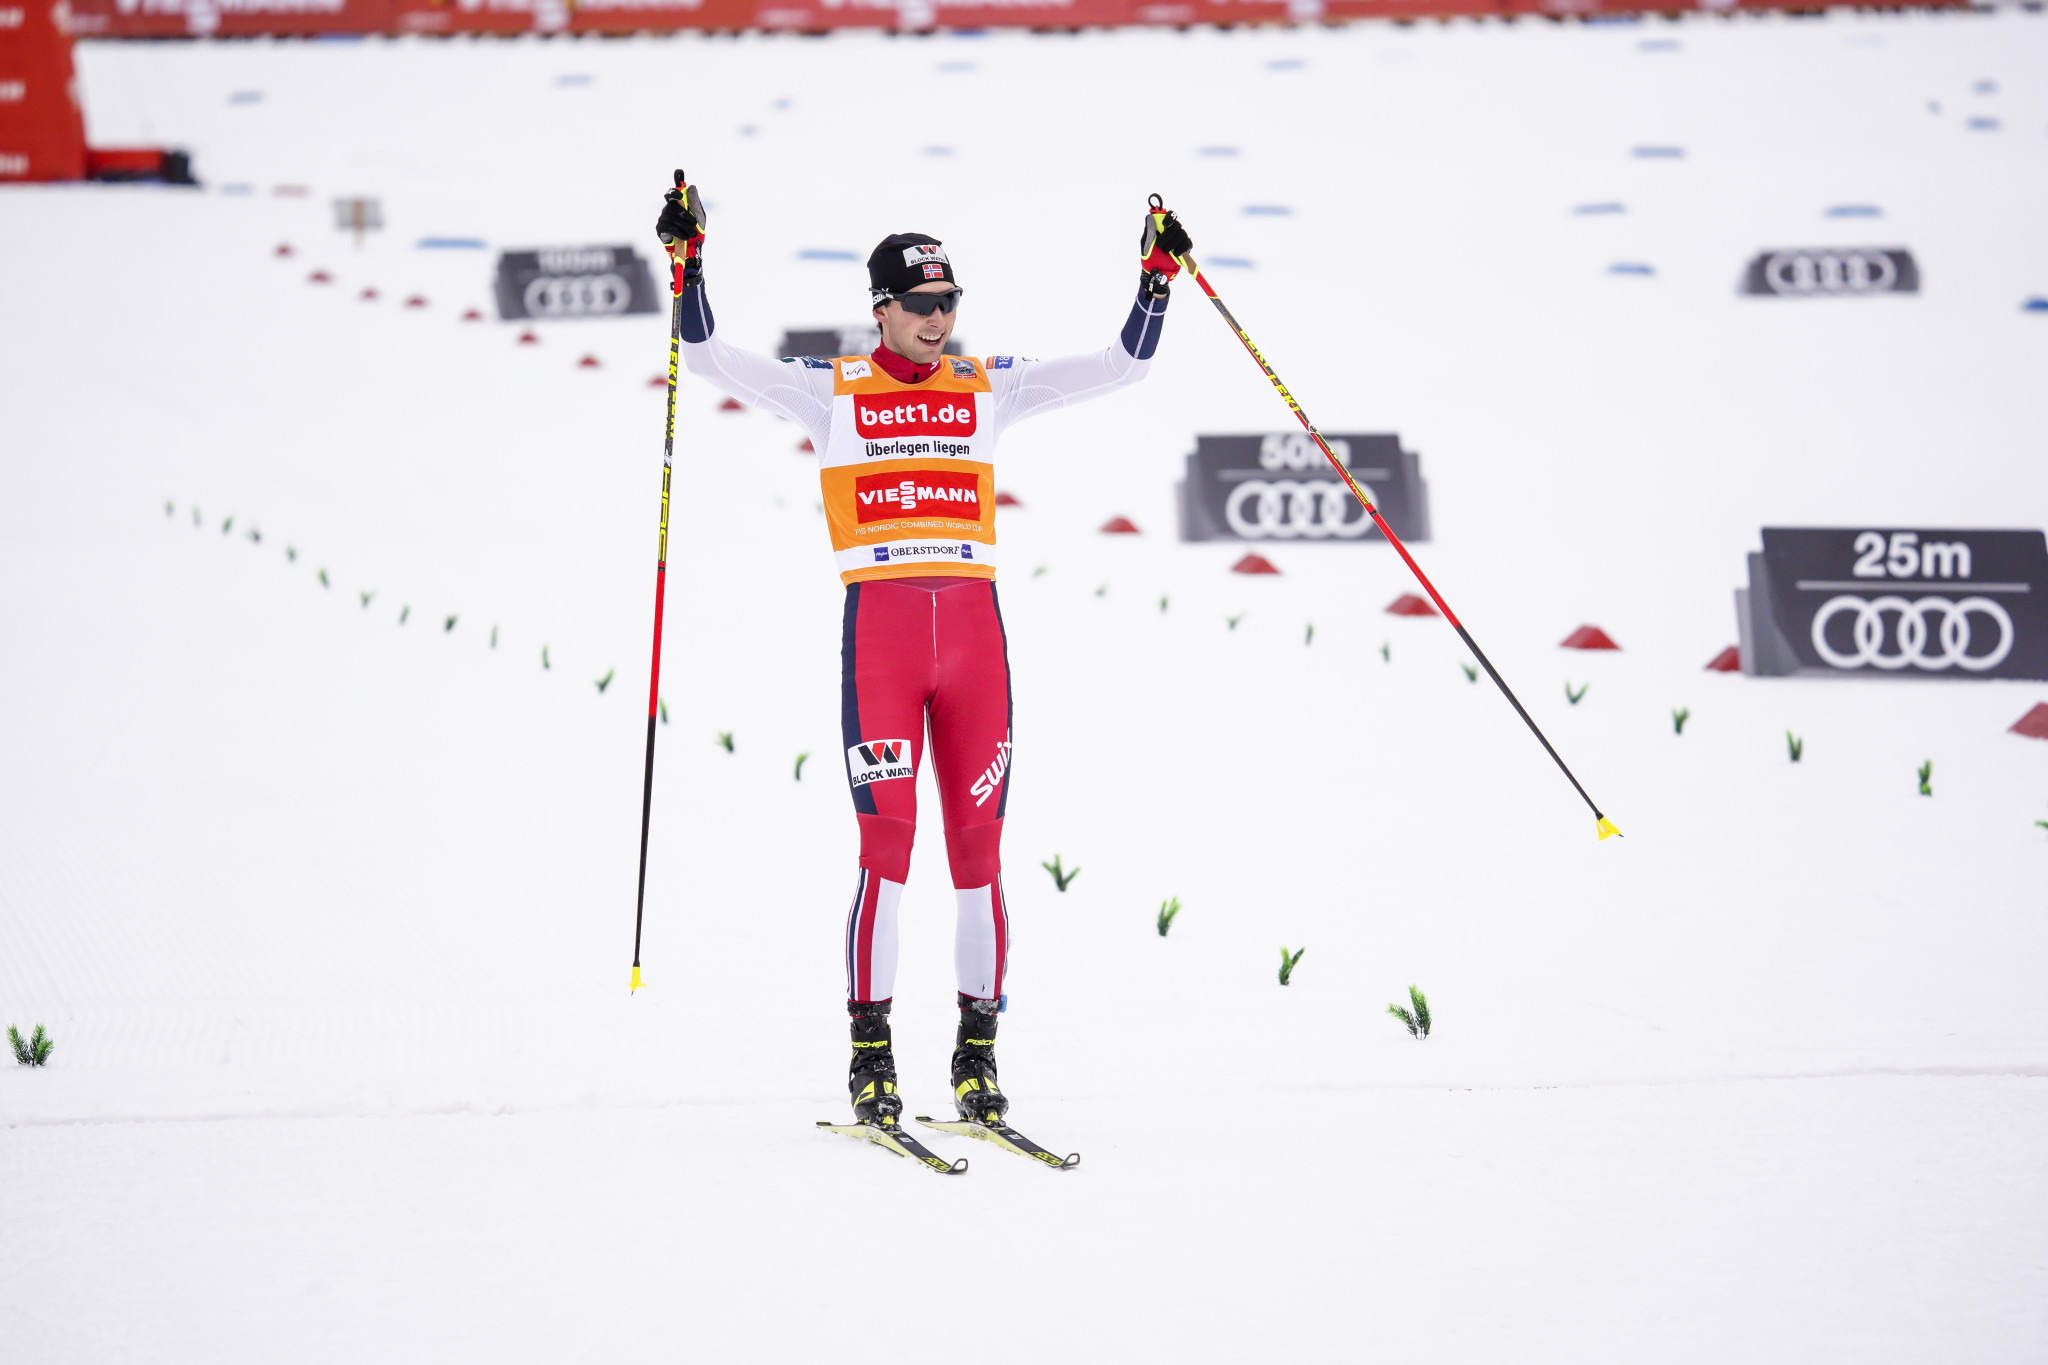 FIS Nordic Combined World Cup Triple set to begin in Seefeld